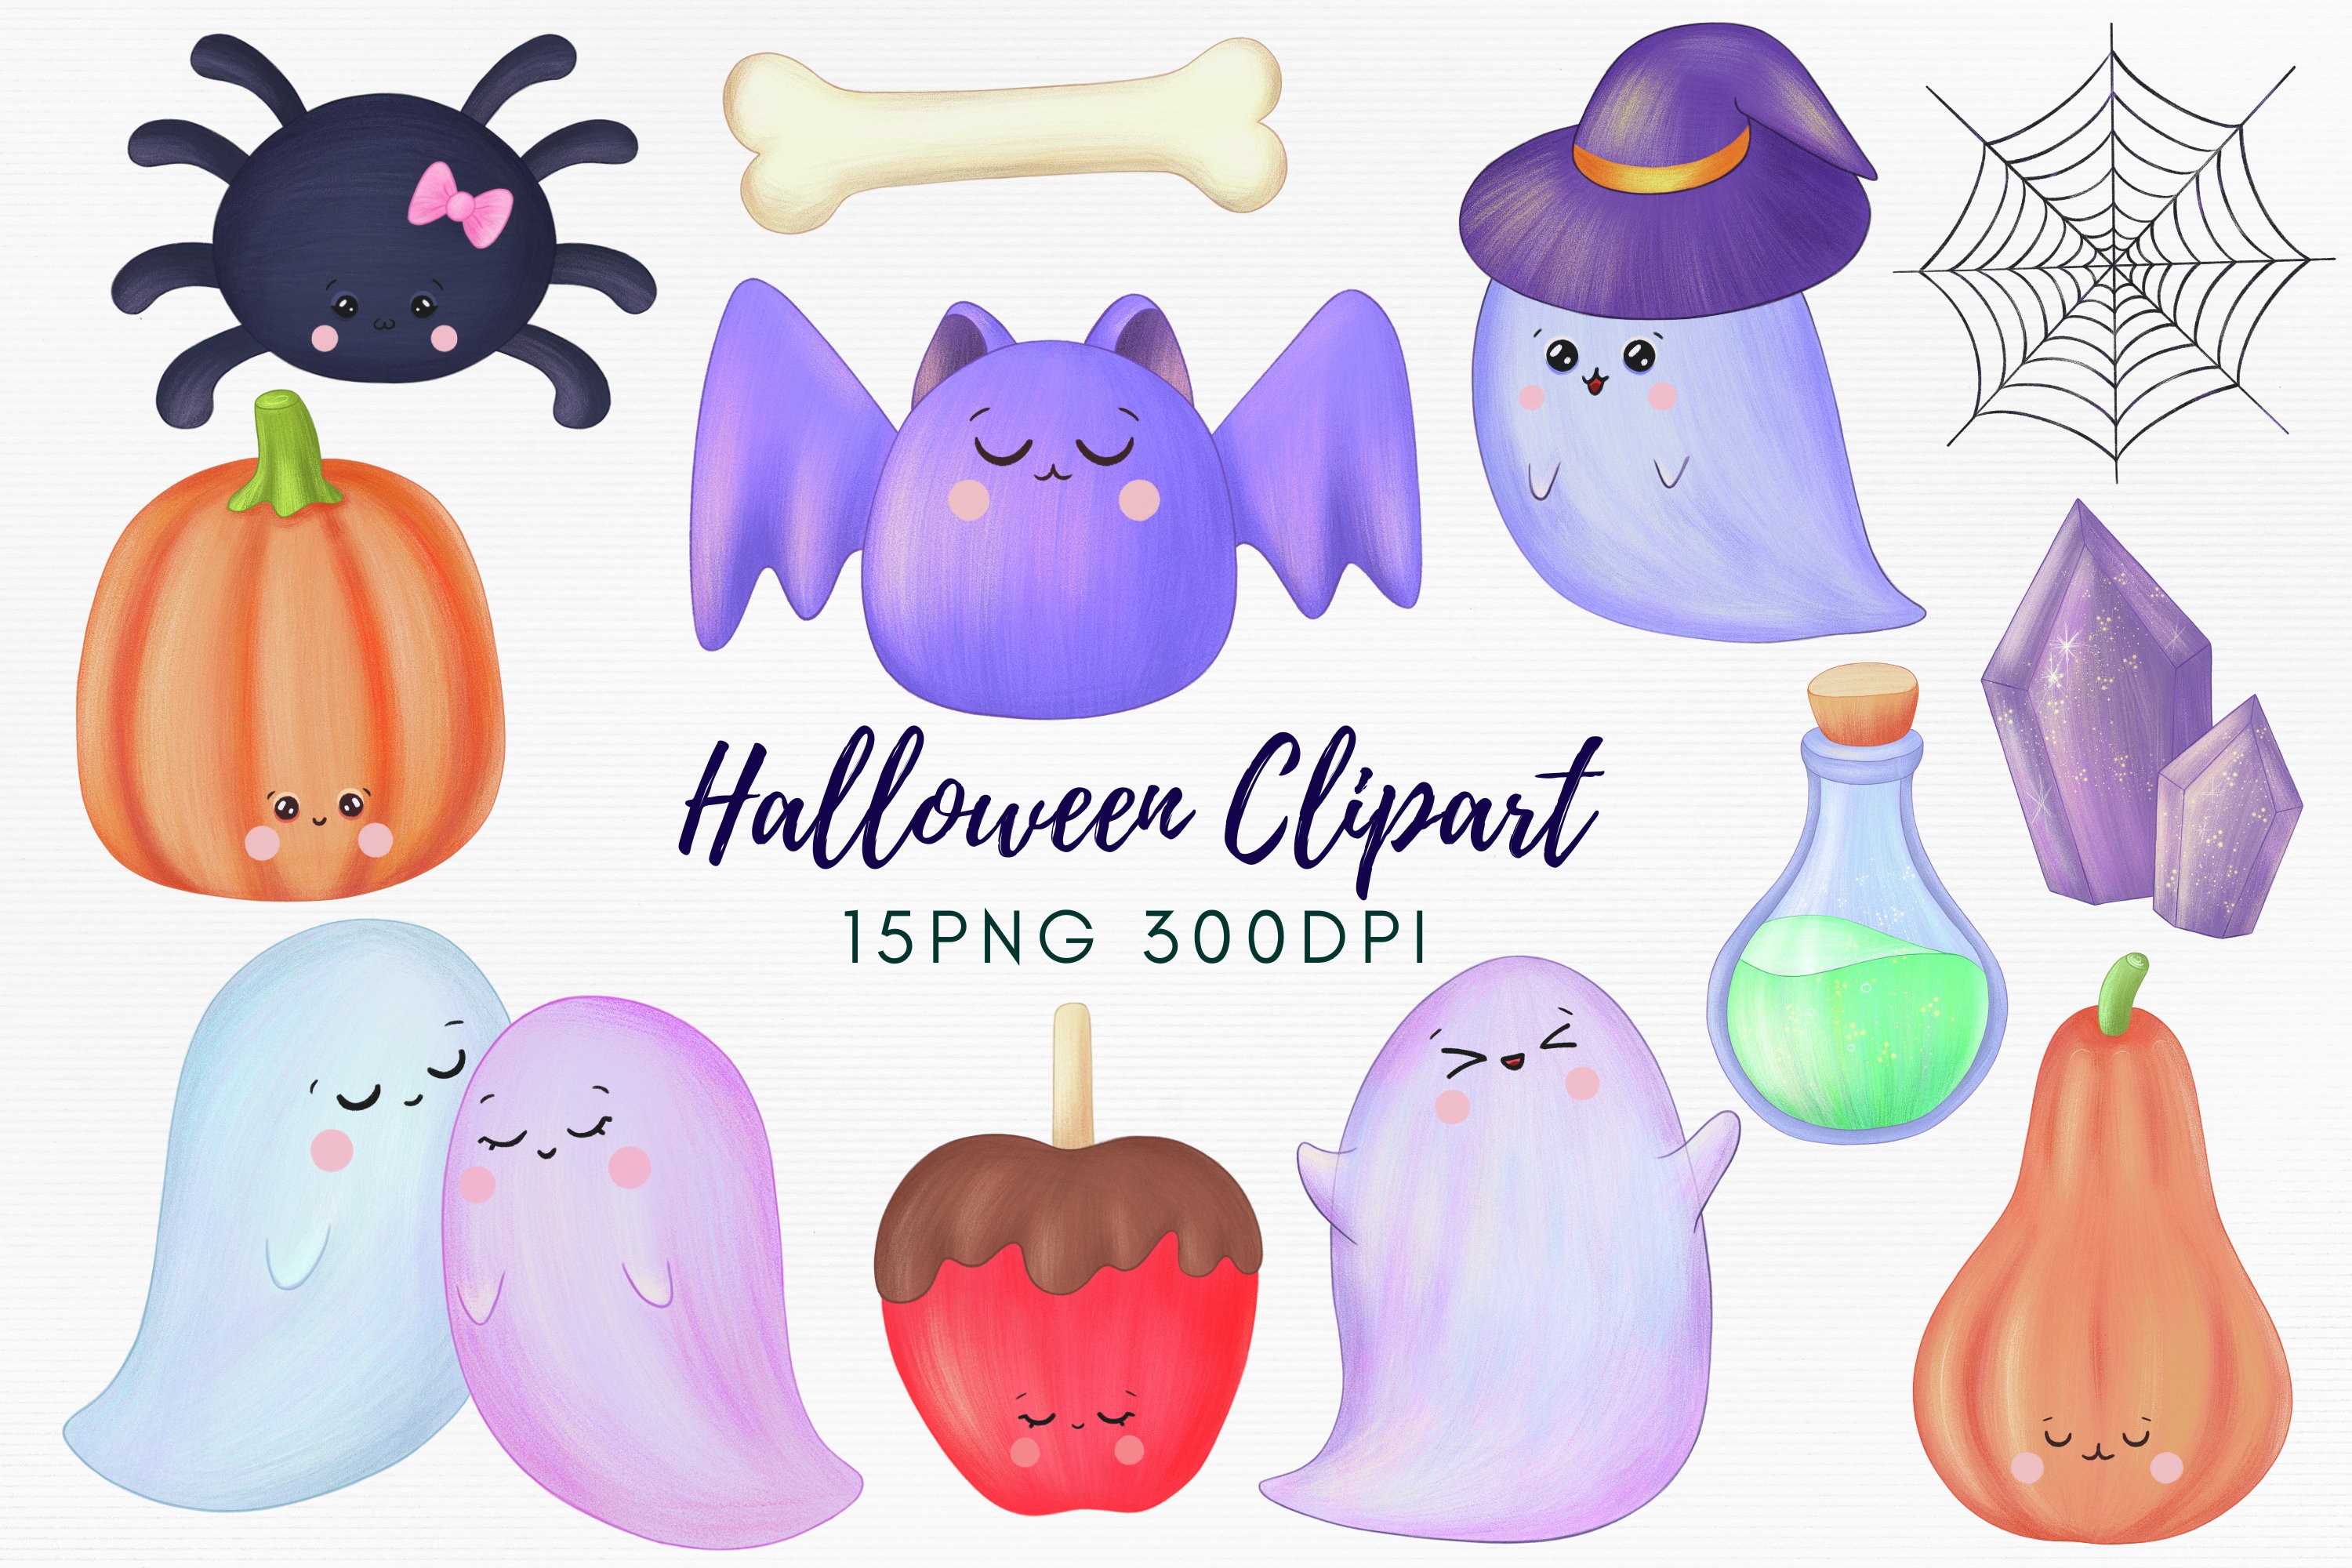 Purple lettering "Halloween Clipart" and different kawaii halloween illustrations on a gray background.